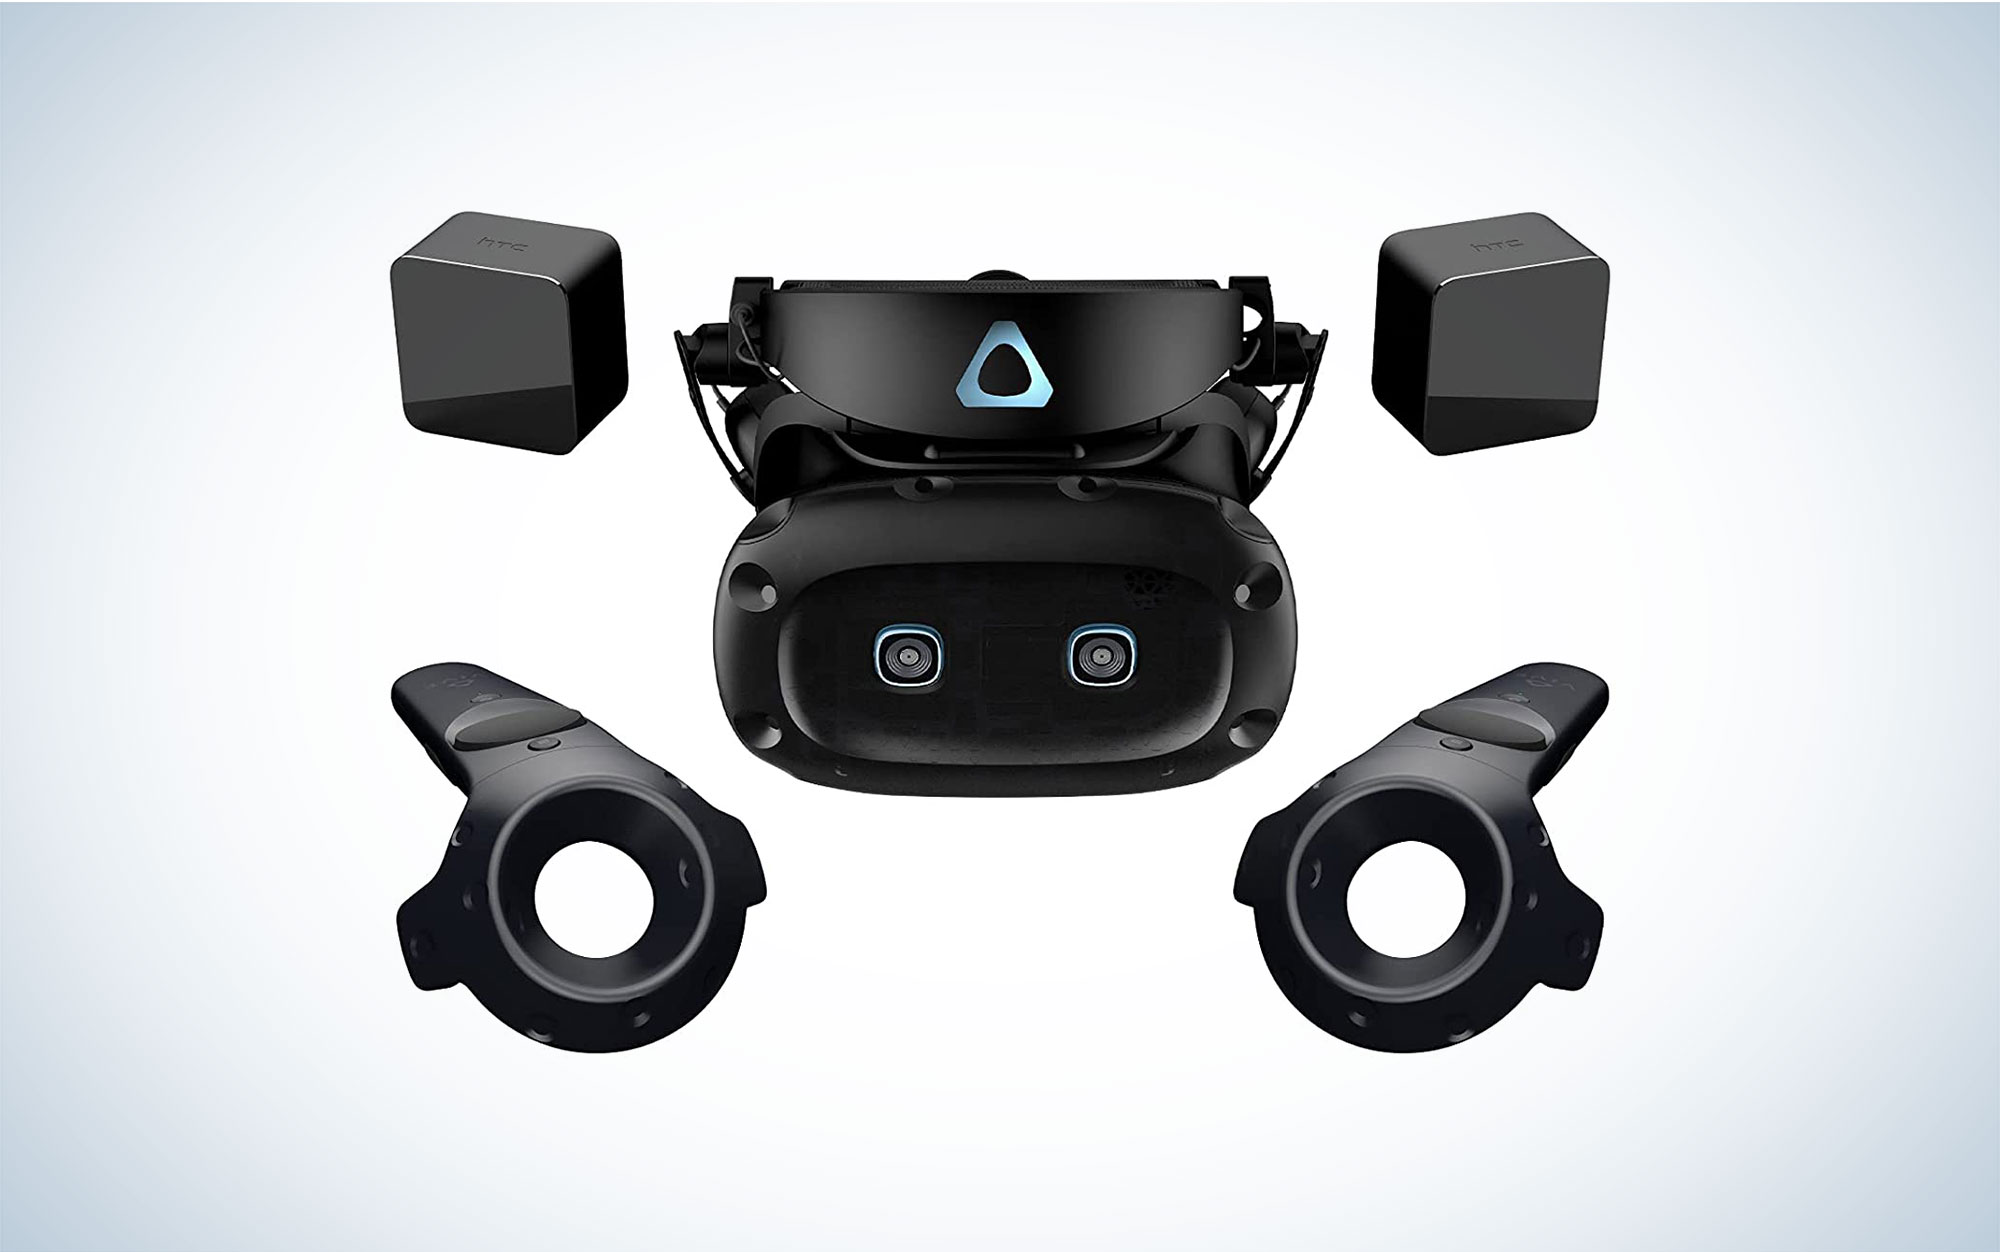 Best VR headset 2023: Our top picks for virtual reality